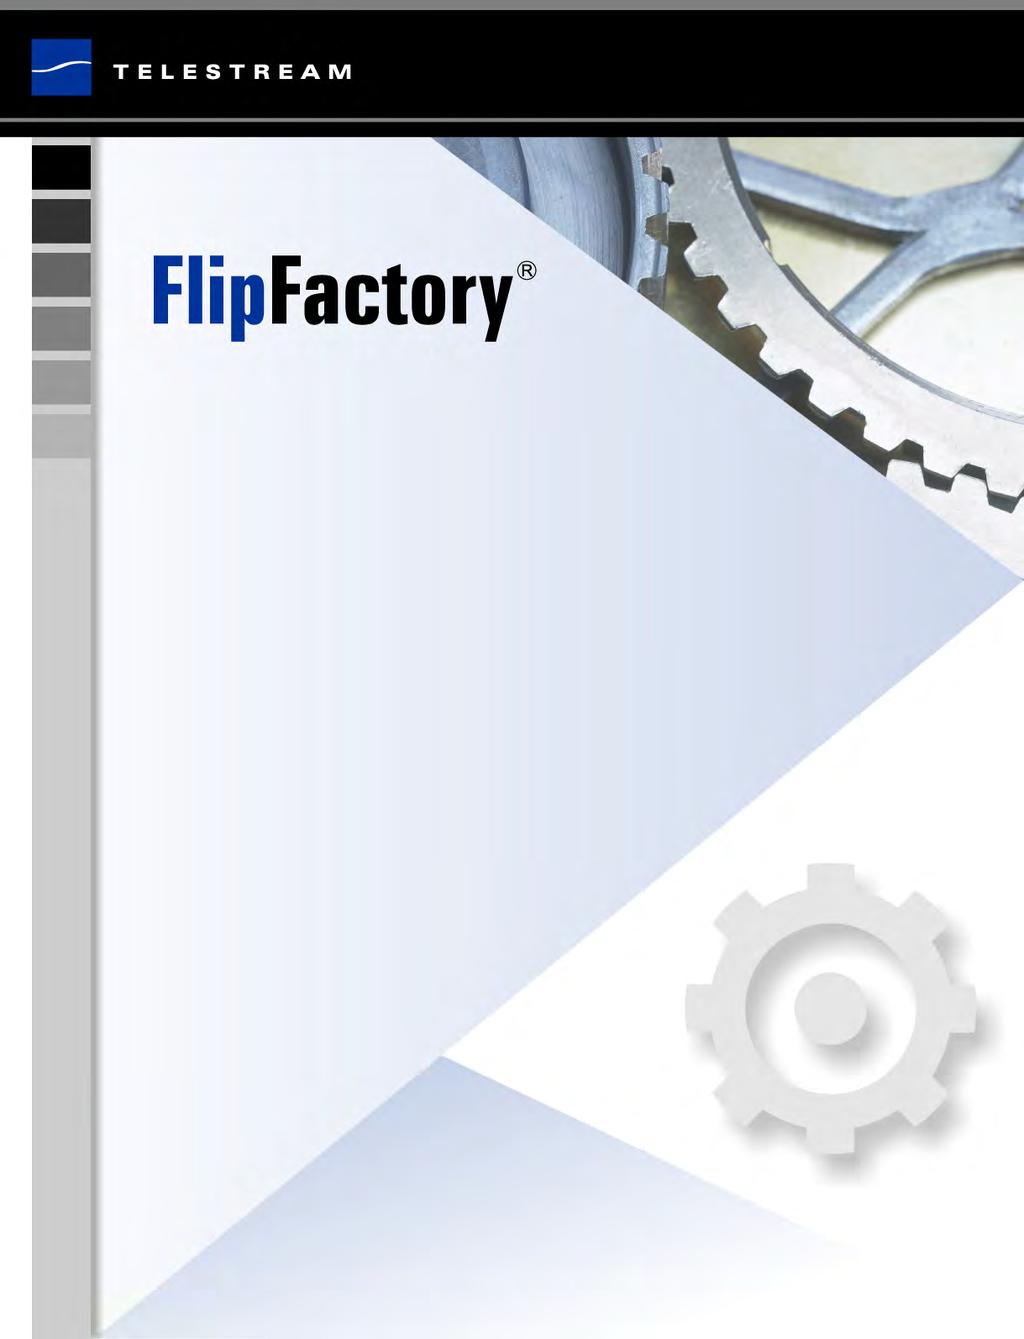 A PP NOTE FLIPSCAN OPTION Introduction... 2 Adding FlipScan to a Factory... 3 Viewing FlipScan Metadata... 5 Saving Metadata in XML Format... 6 Creating a Simple FlipScan Workflow.